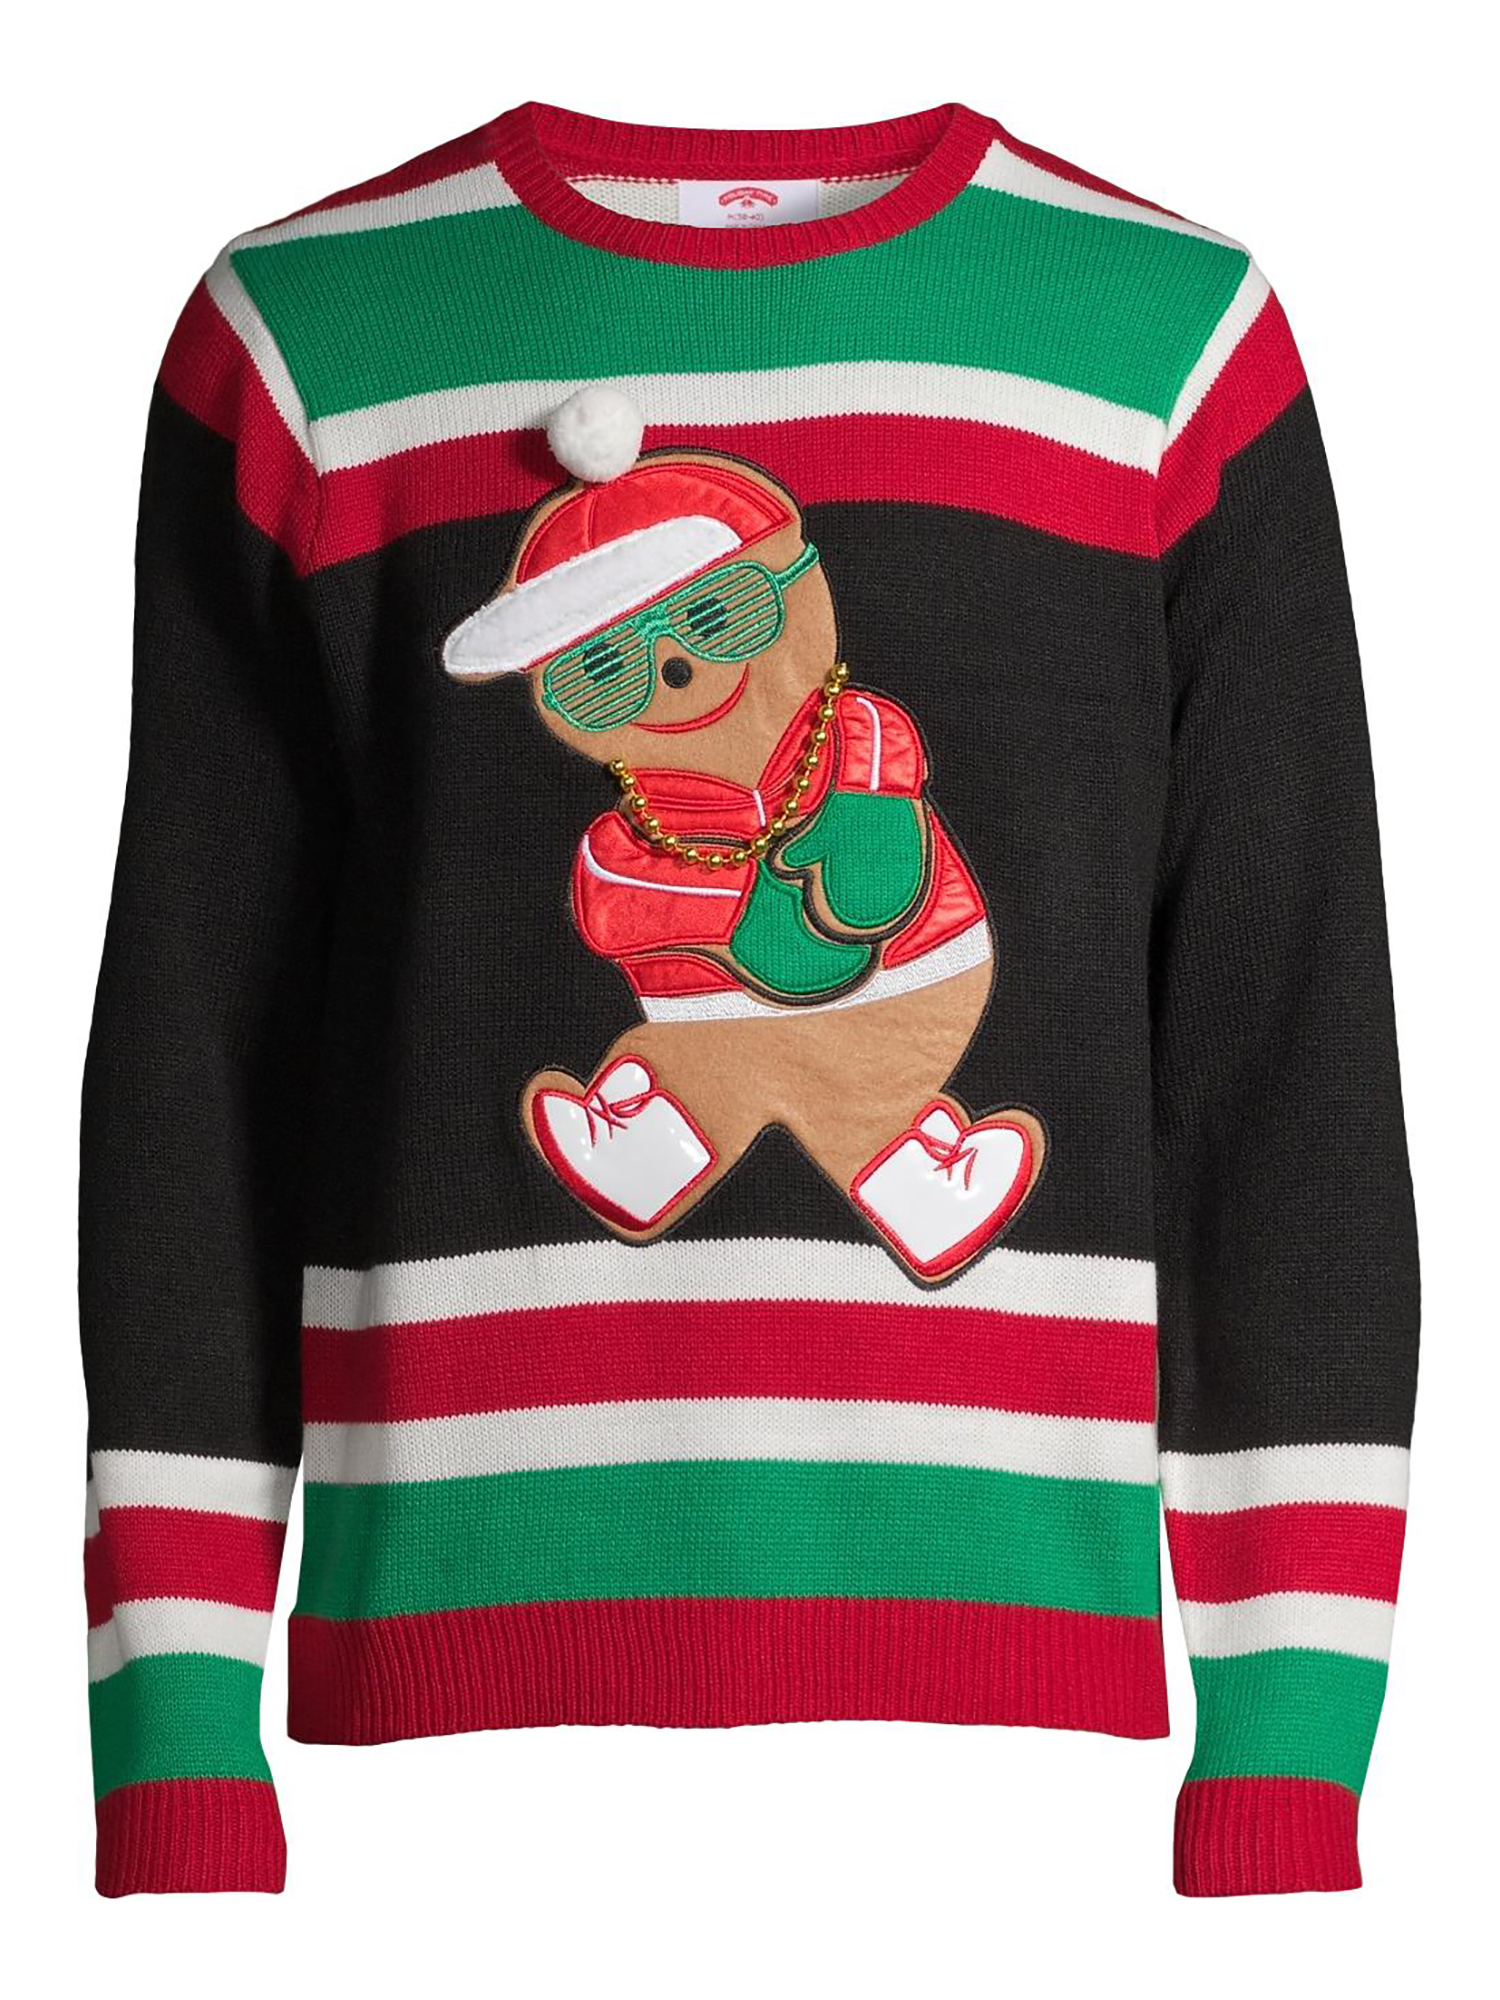 Holiday Time Men's and Big Men's Ugly Christmas Sweater - image 4 of 6